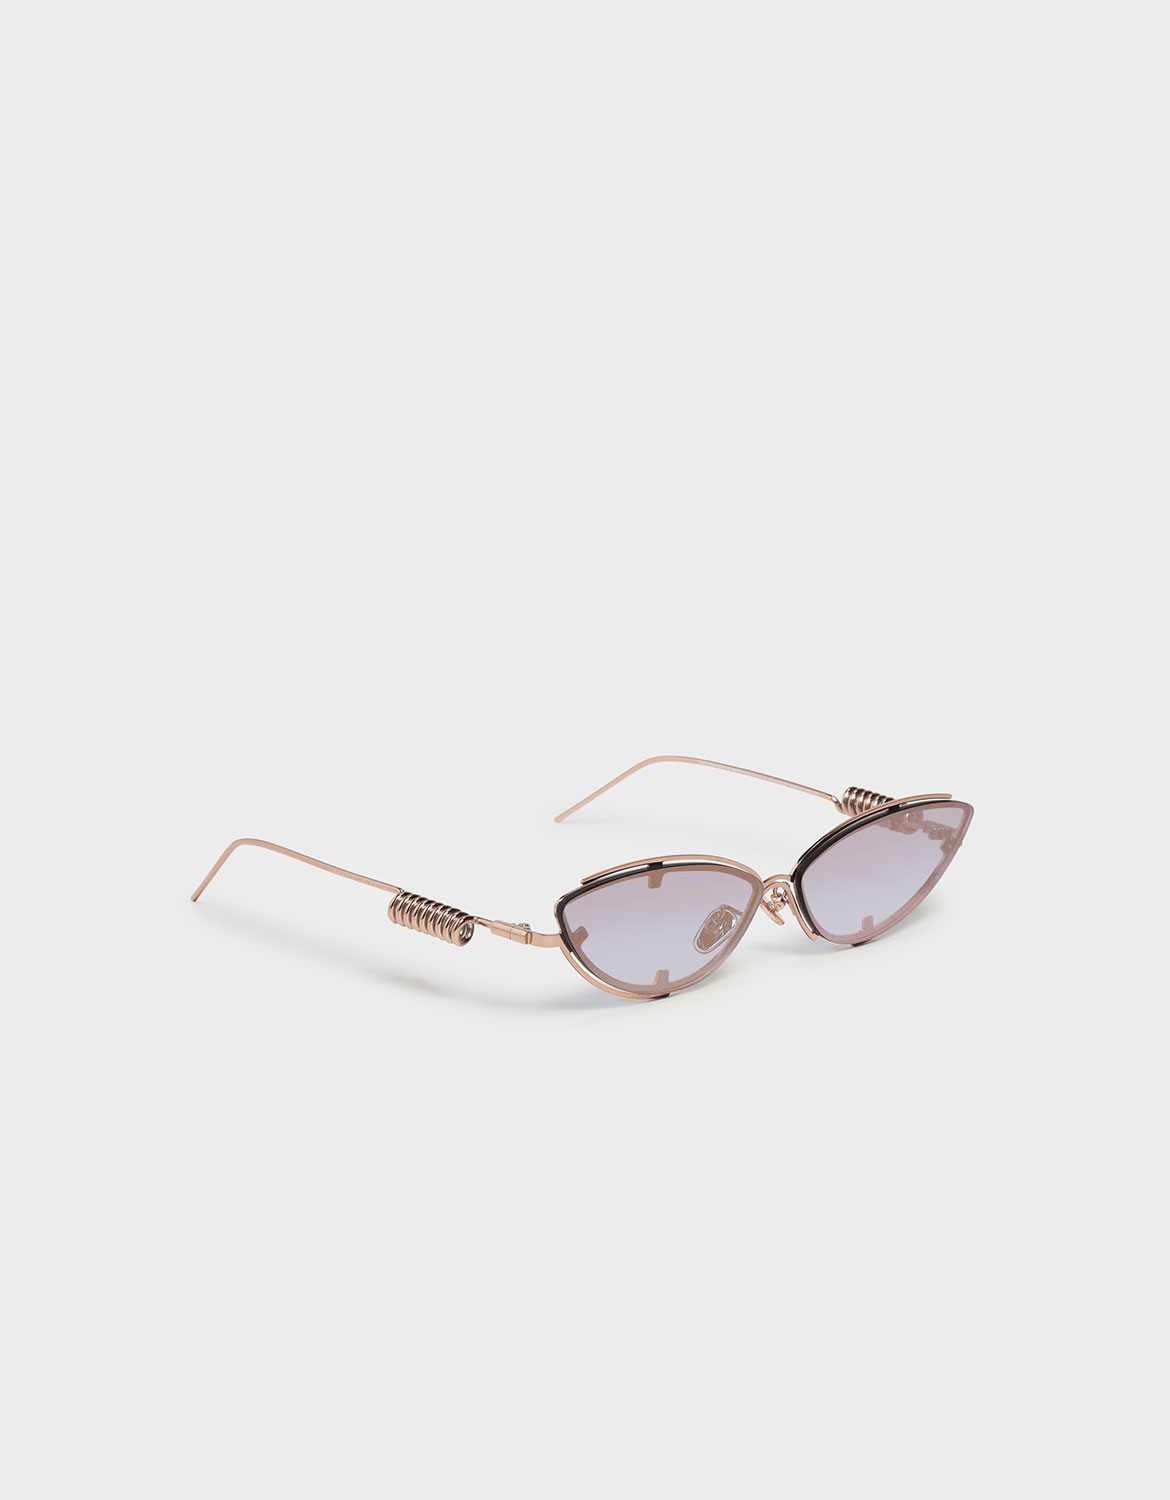 Women's Double Frame Cat-Eye Sunglasses in rose gold - CHARLES & KEITH